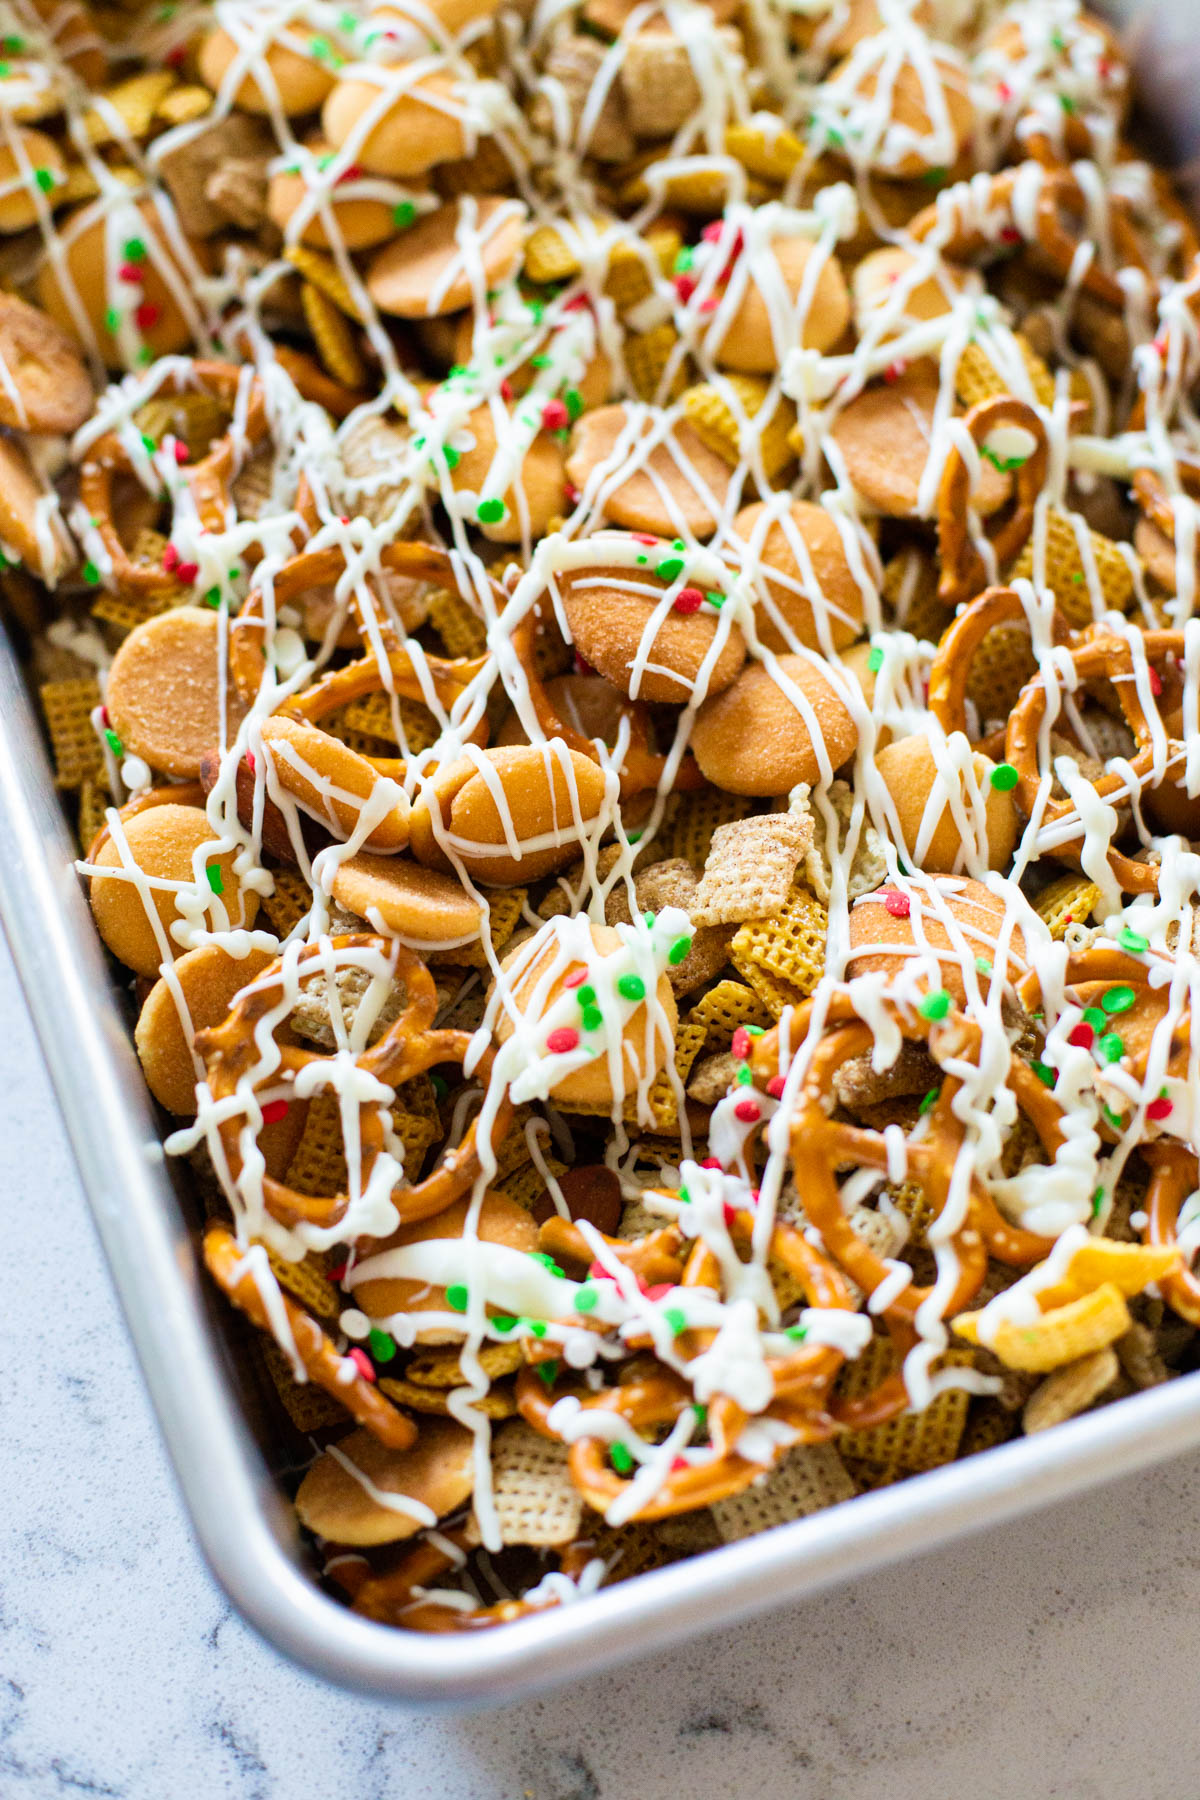 The chex mix has drizzled white chocolate over the top.